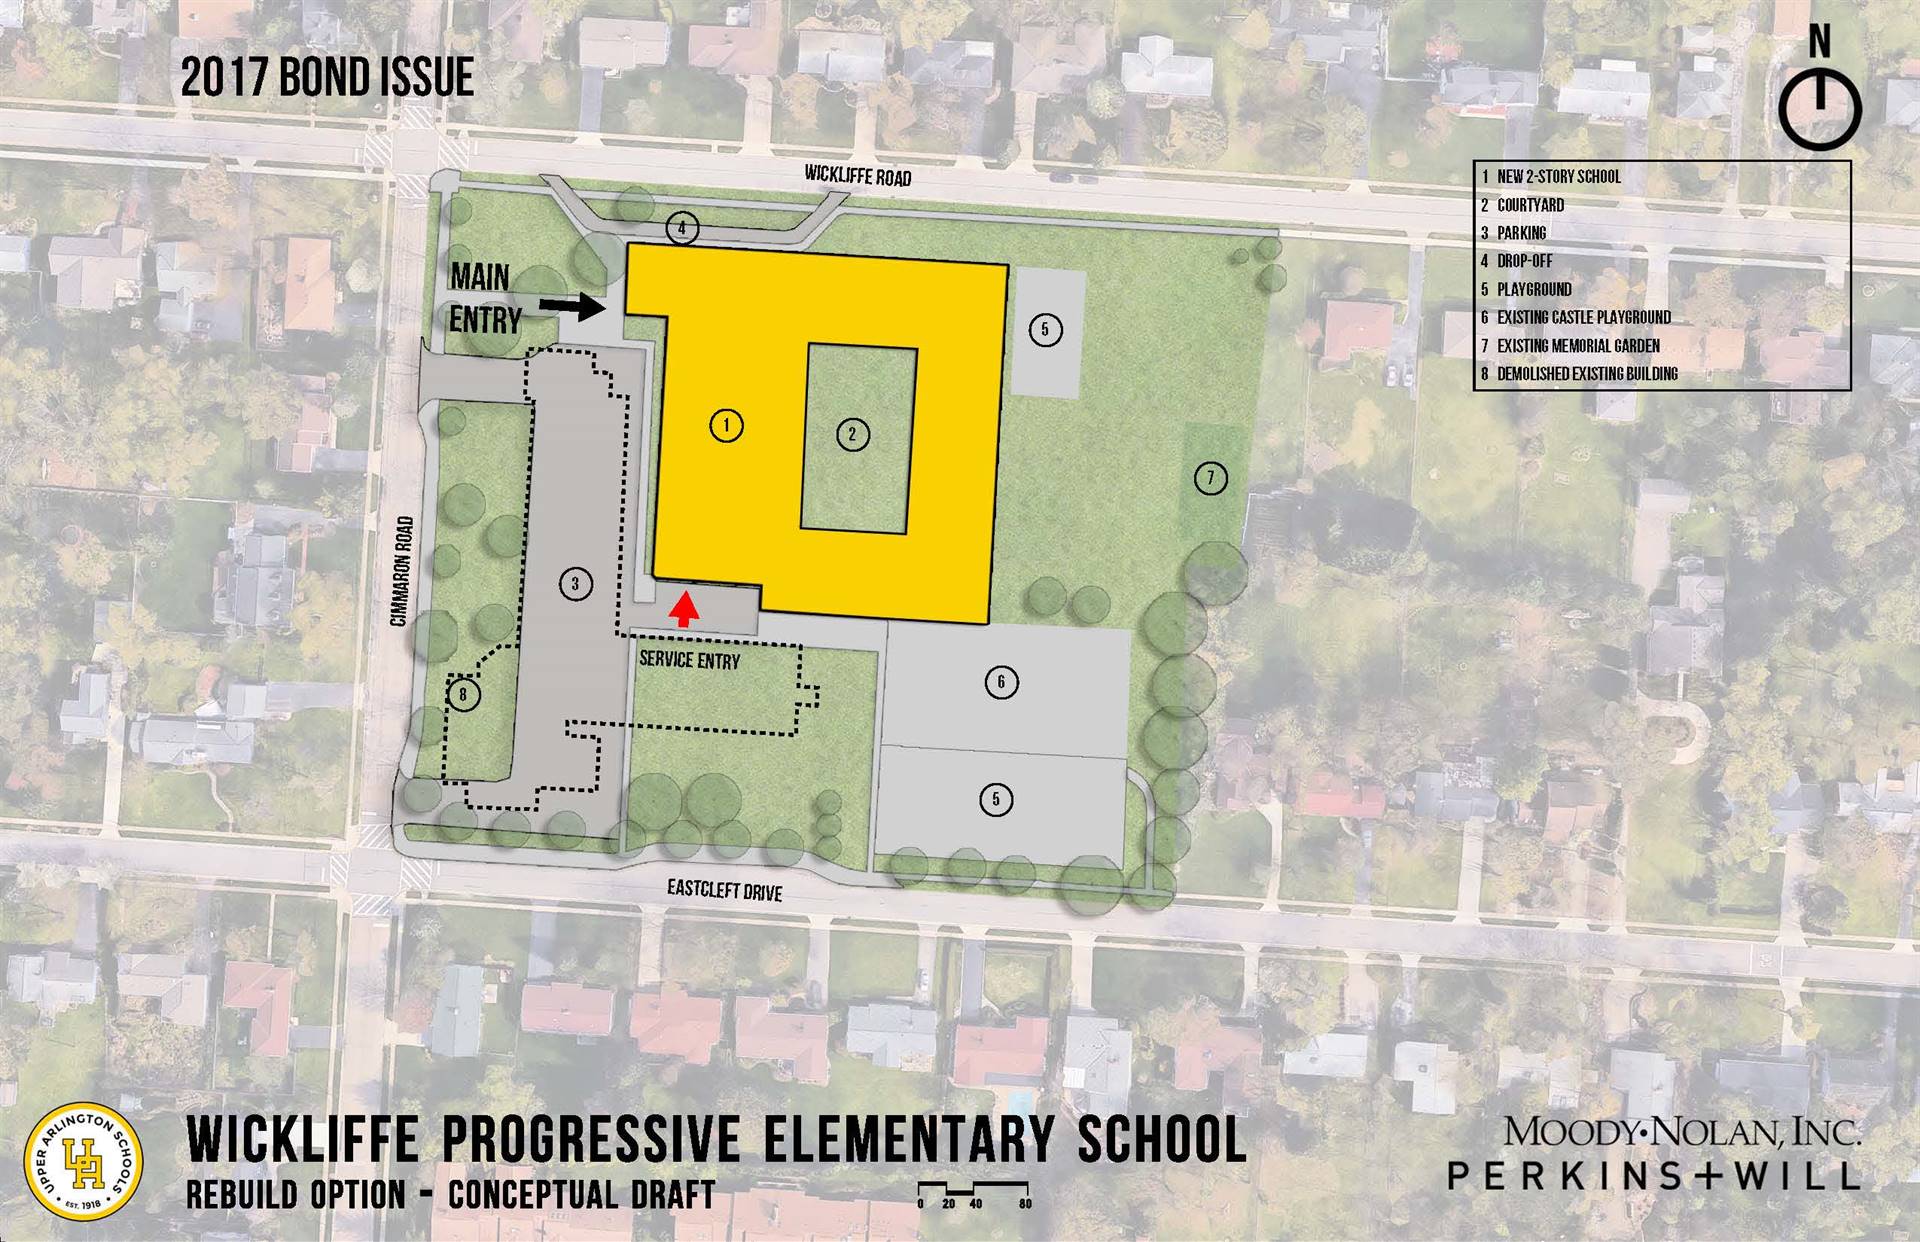 Conceptual new site plan for Wickliffe